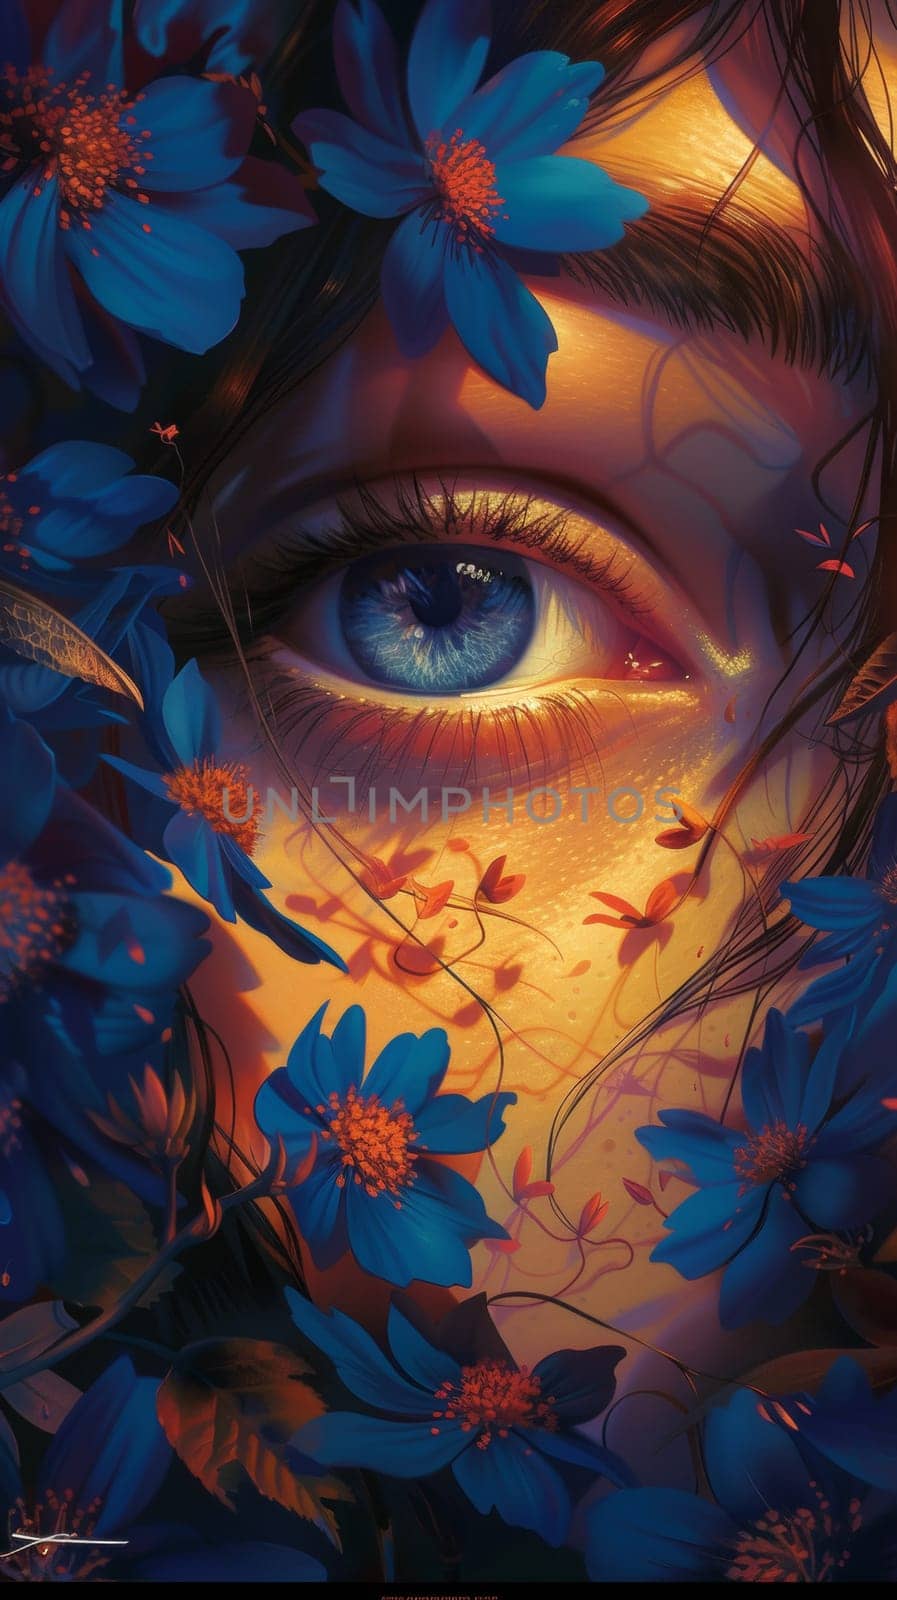 A close up of a woman's face surrounded by blue flowers